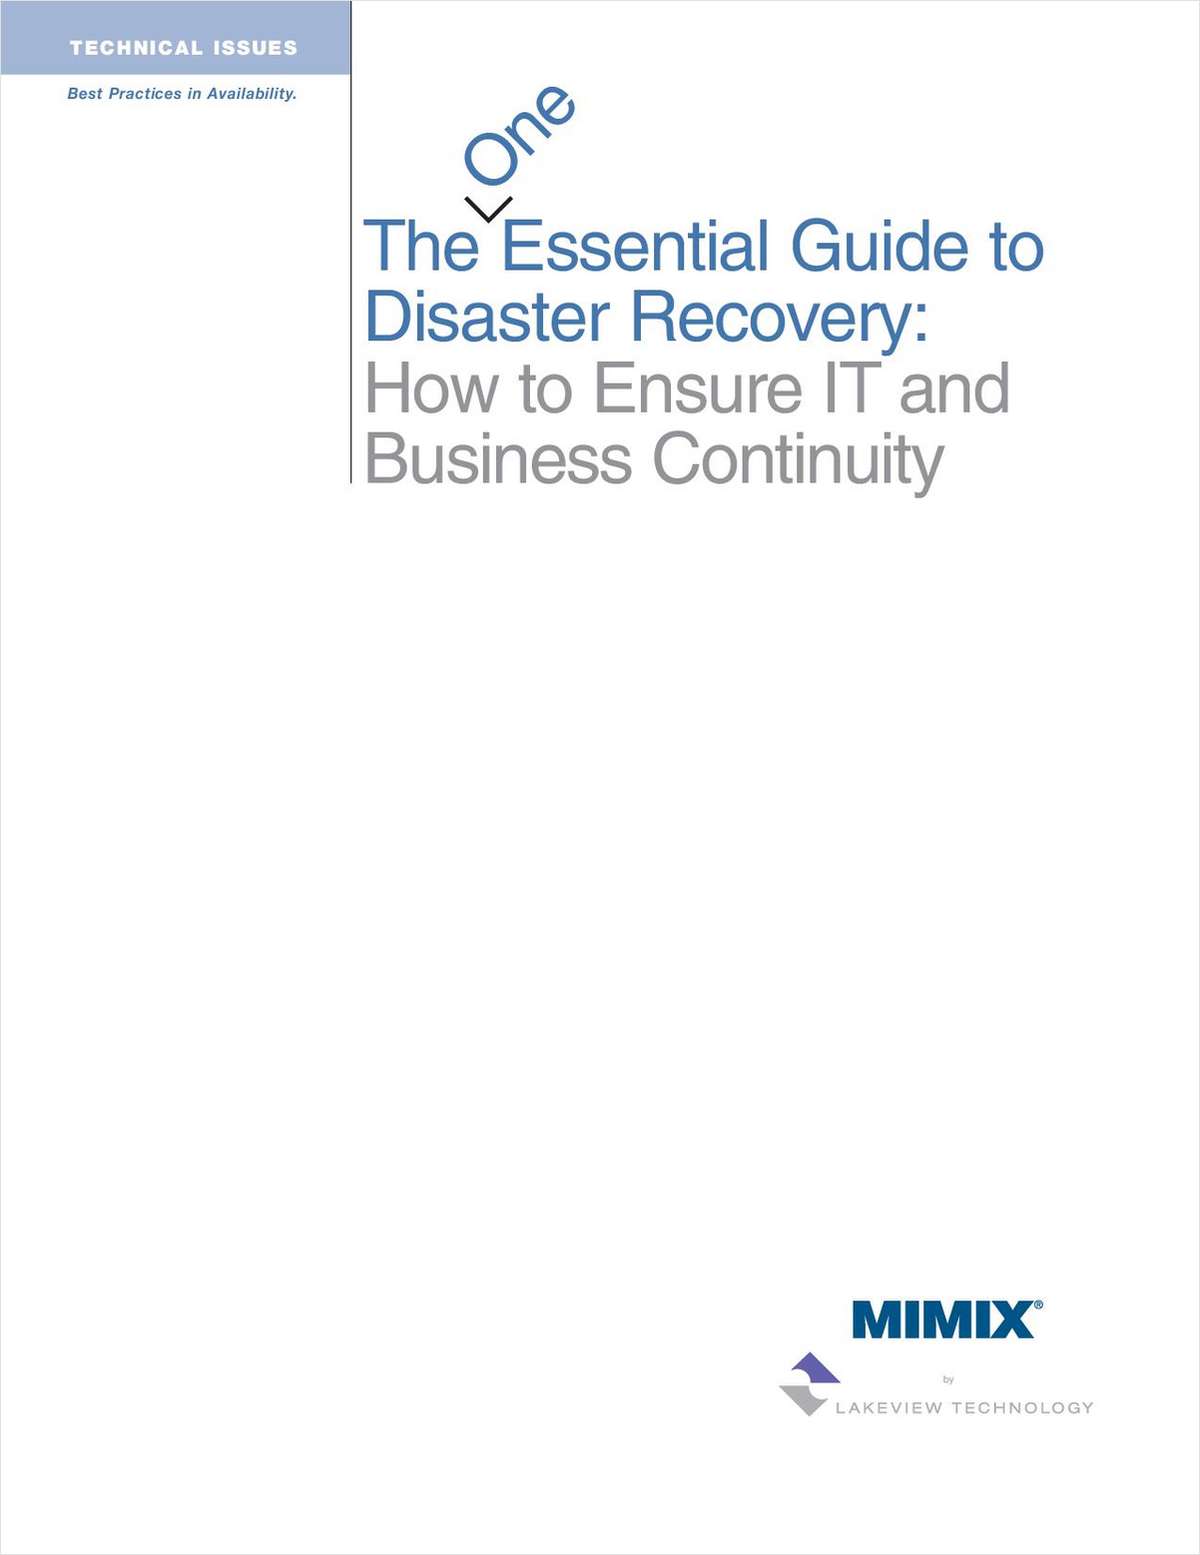 Essential Guide to Disaster Recovery in System i (AS/400) and AIX environments